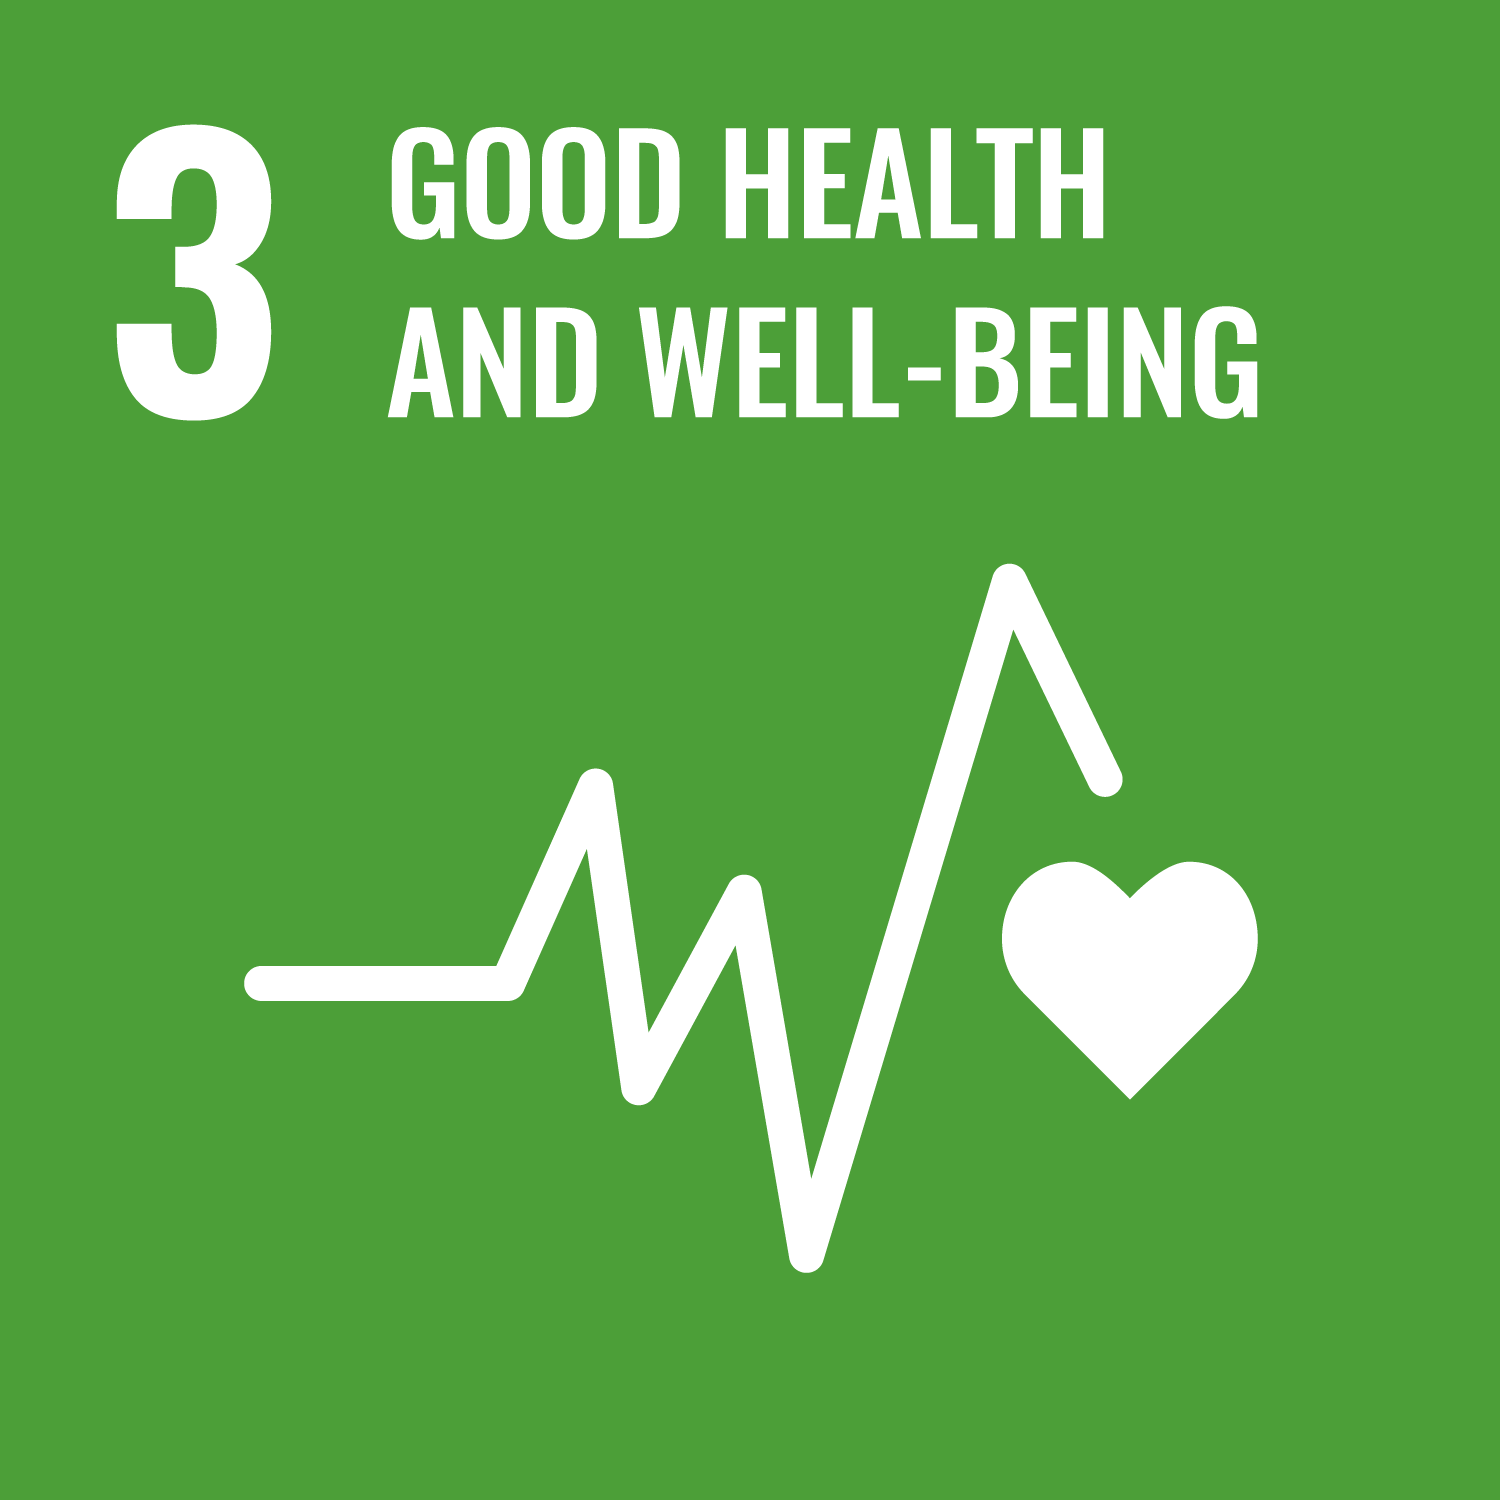 United Nations Sustainable Development Goal Number 3 Good Health and Well-Beong